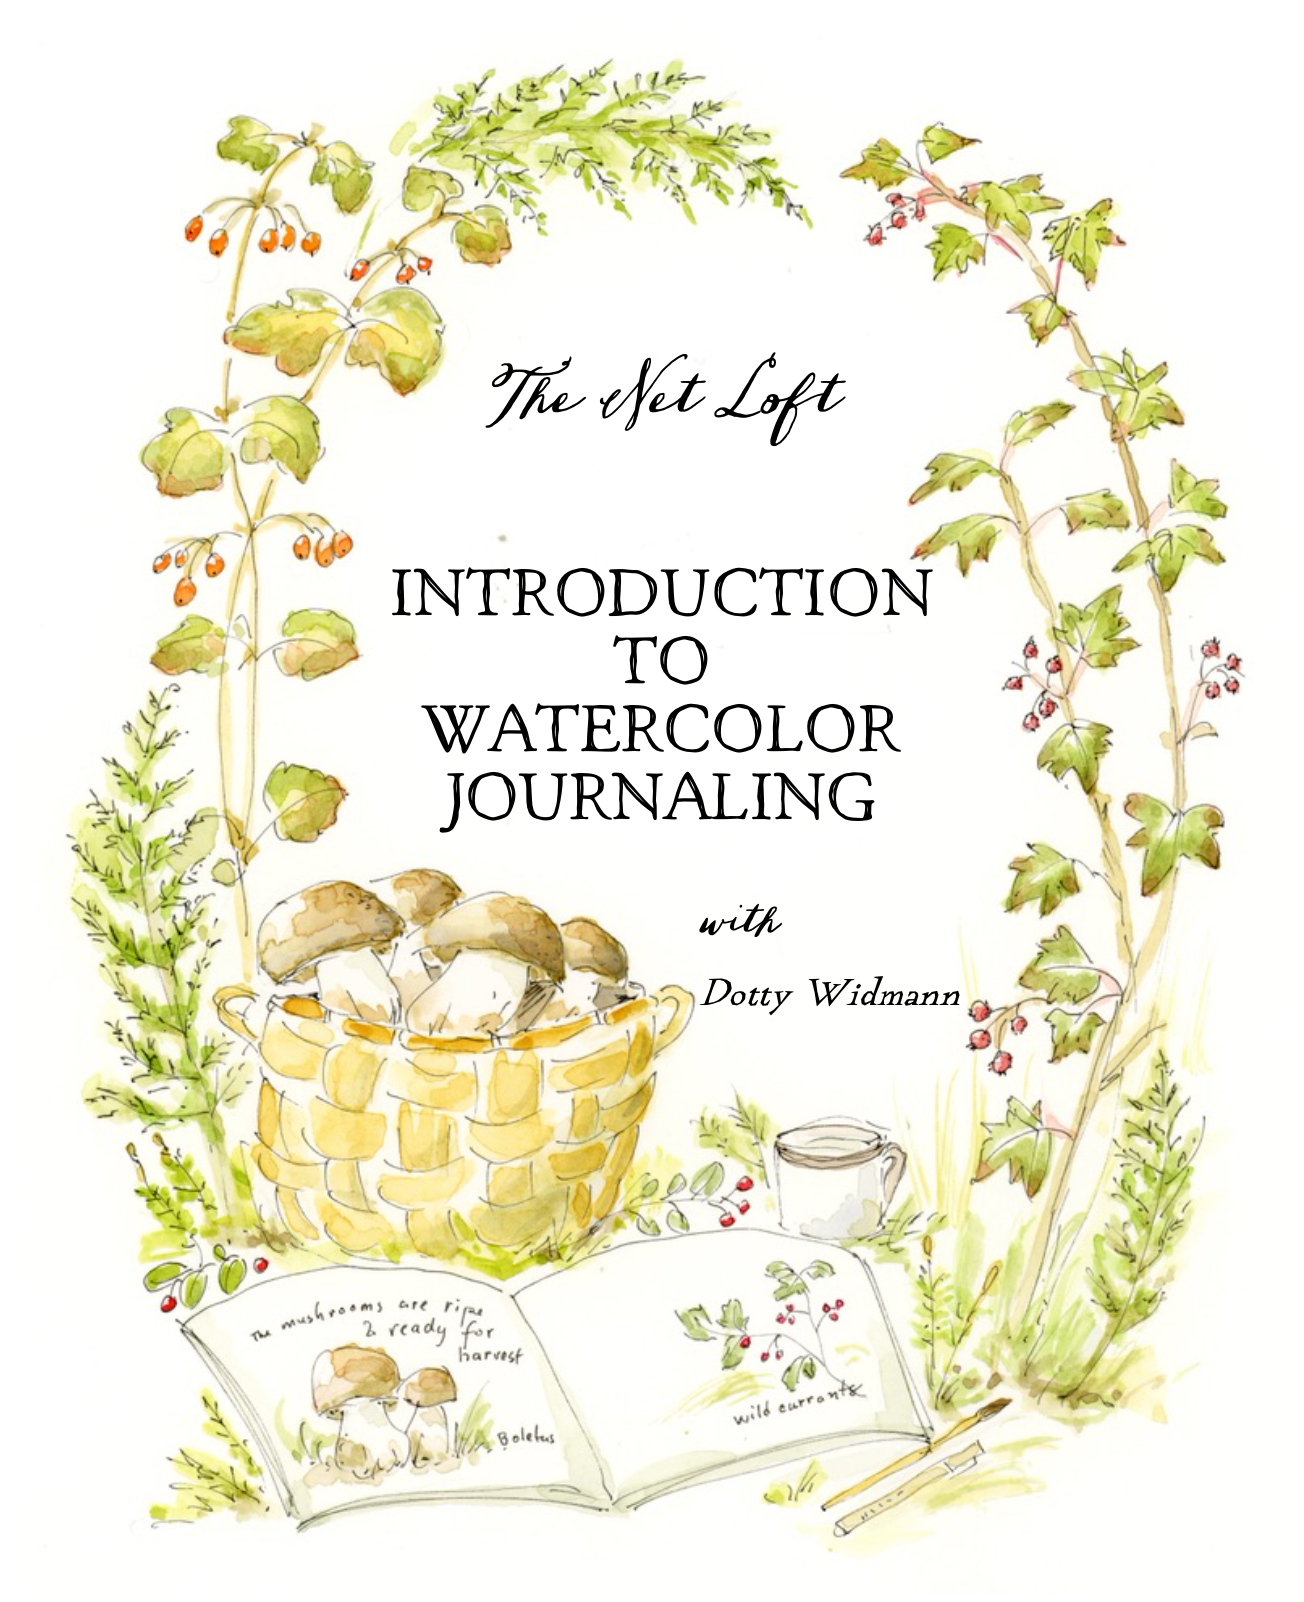 Introduction to Net Loft Watercolor Journaling Sessions: Getting Started Live Zoom